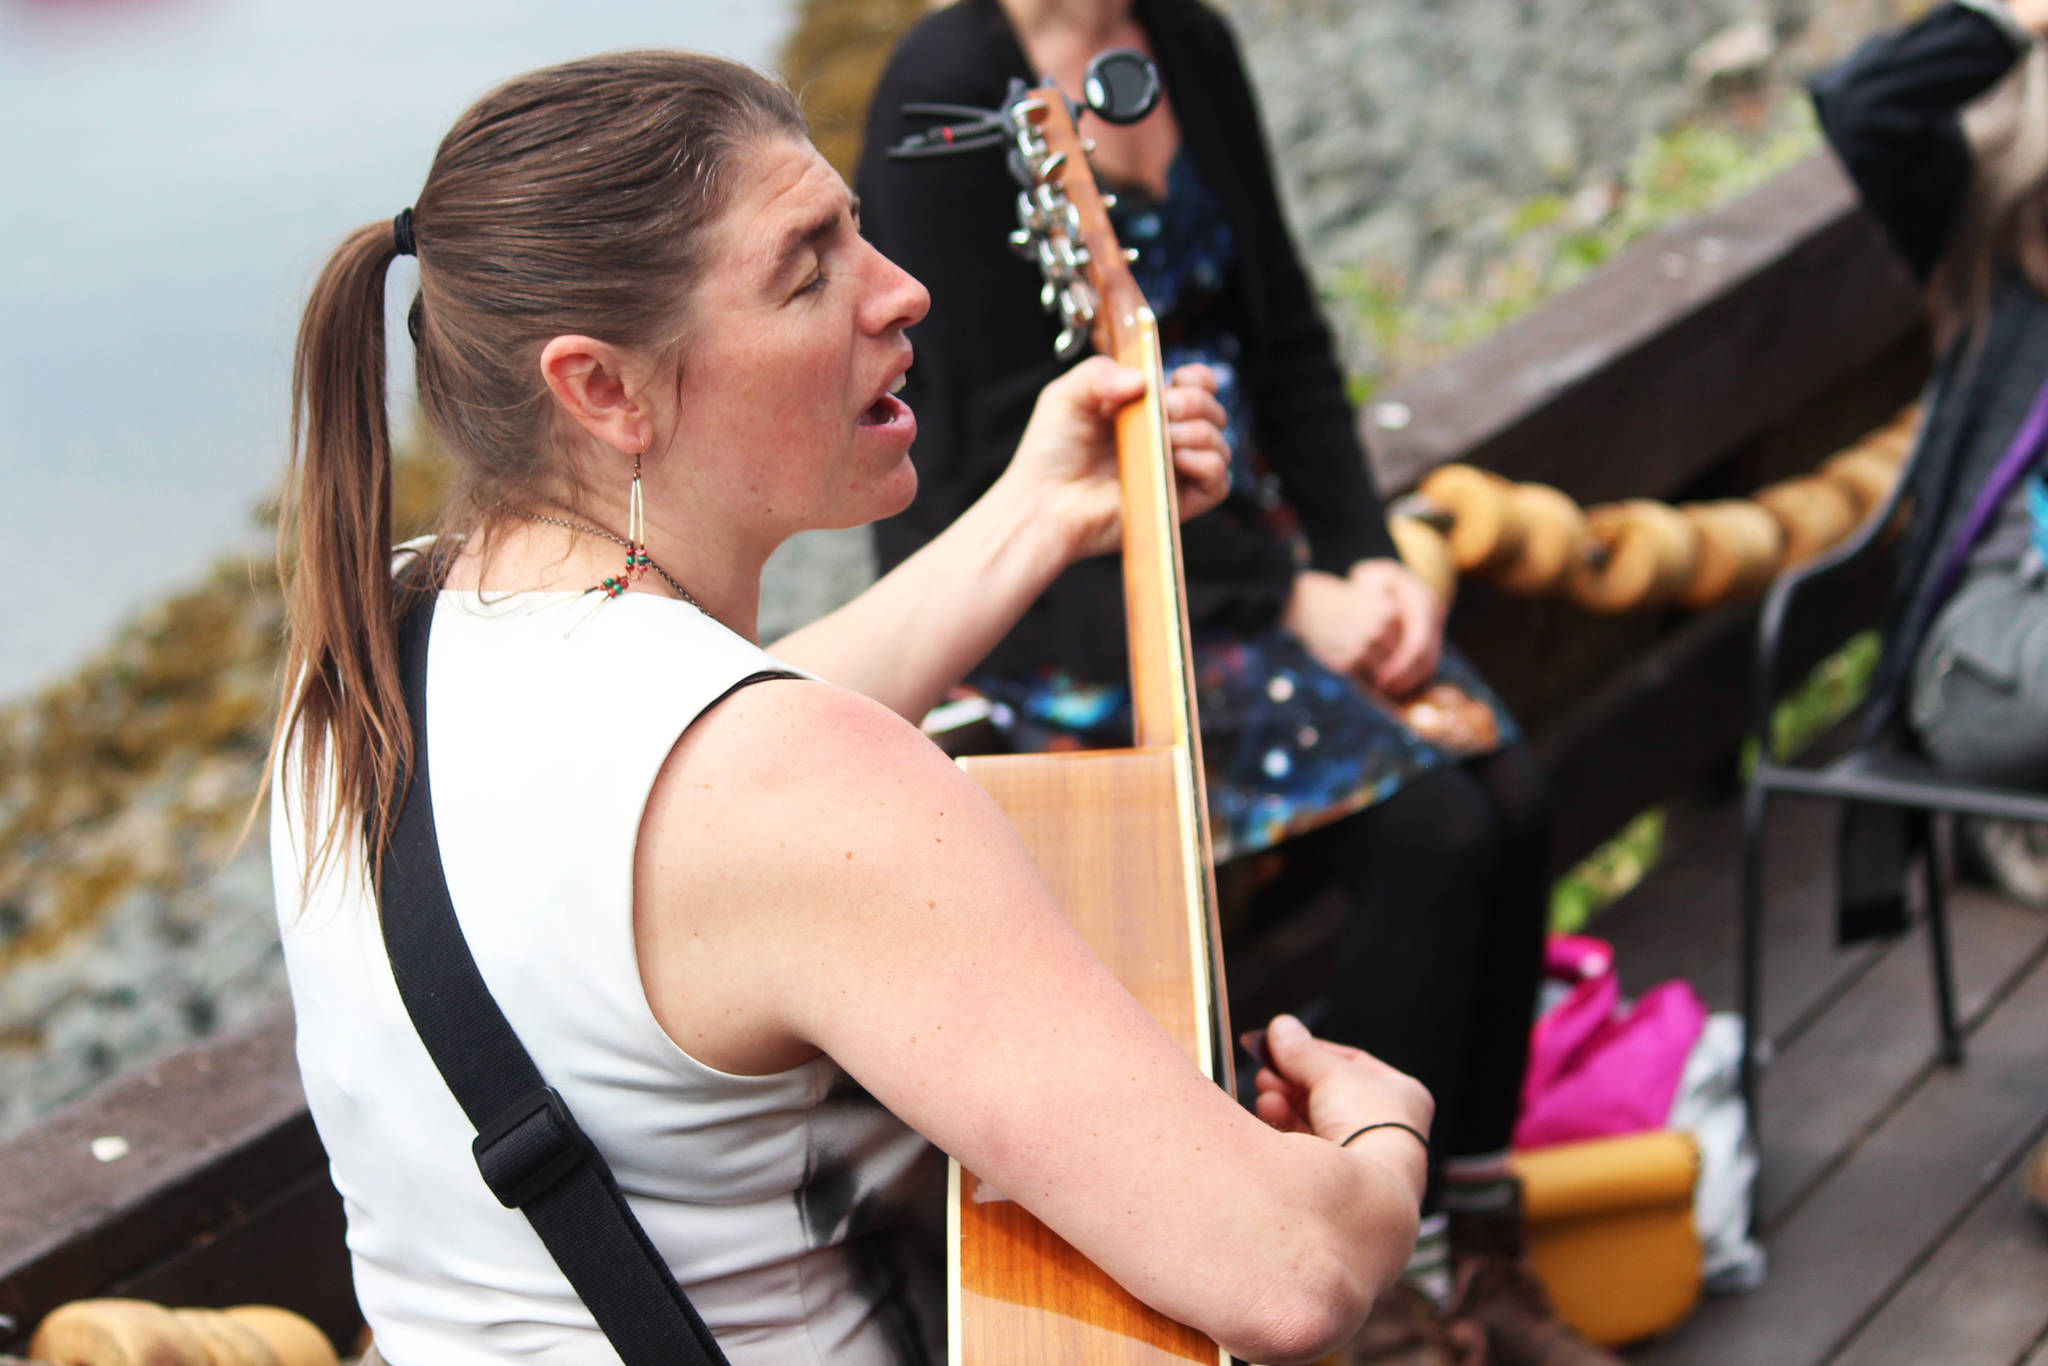 Kat Moore performs a set on Friday, June 21, 2019 at the Seldovia Boardwalk Hotel as part of a round of street performances during the Seldovia Summer Solstice Music Festival in Seldovia, Alaska. (Photo by Megan Pacer/Homer News)